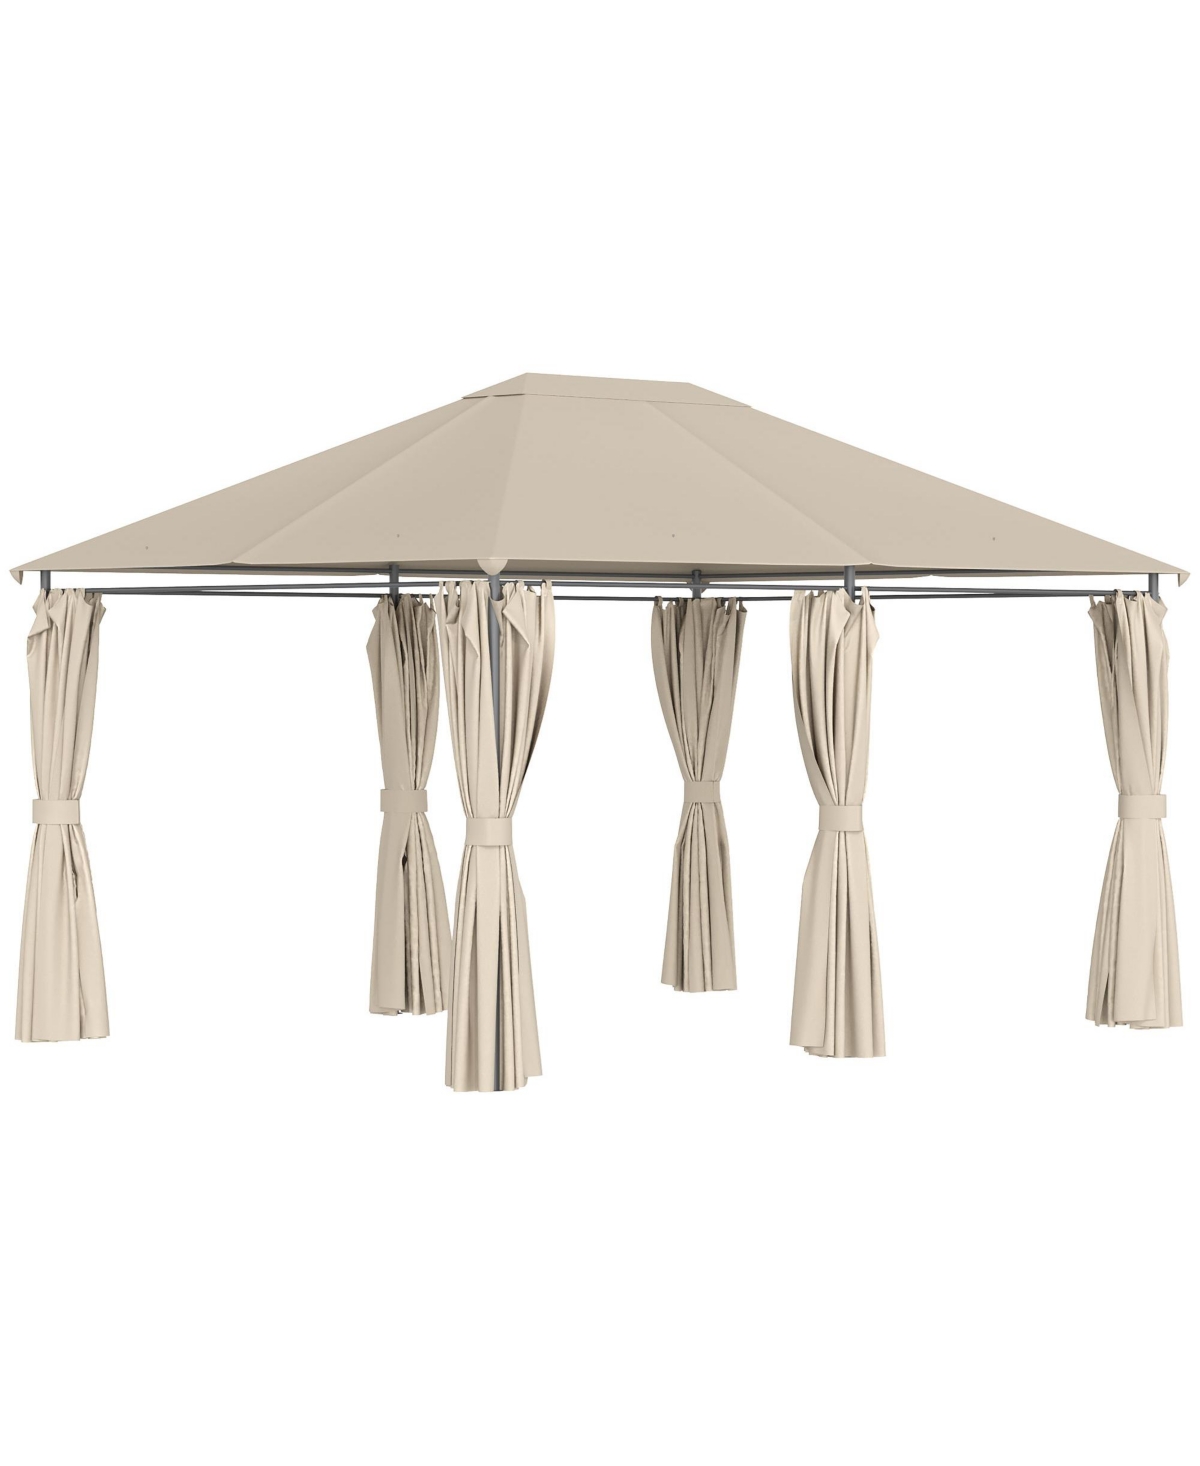 10' x 13' Outdoor Patio Gazebo Canopy Shelter with 6 Removable Sidewalls, & Steel Frame for Garden, Lawn, Backyard and Deck, Khaki - Beige